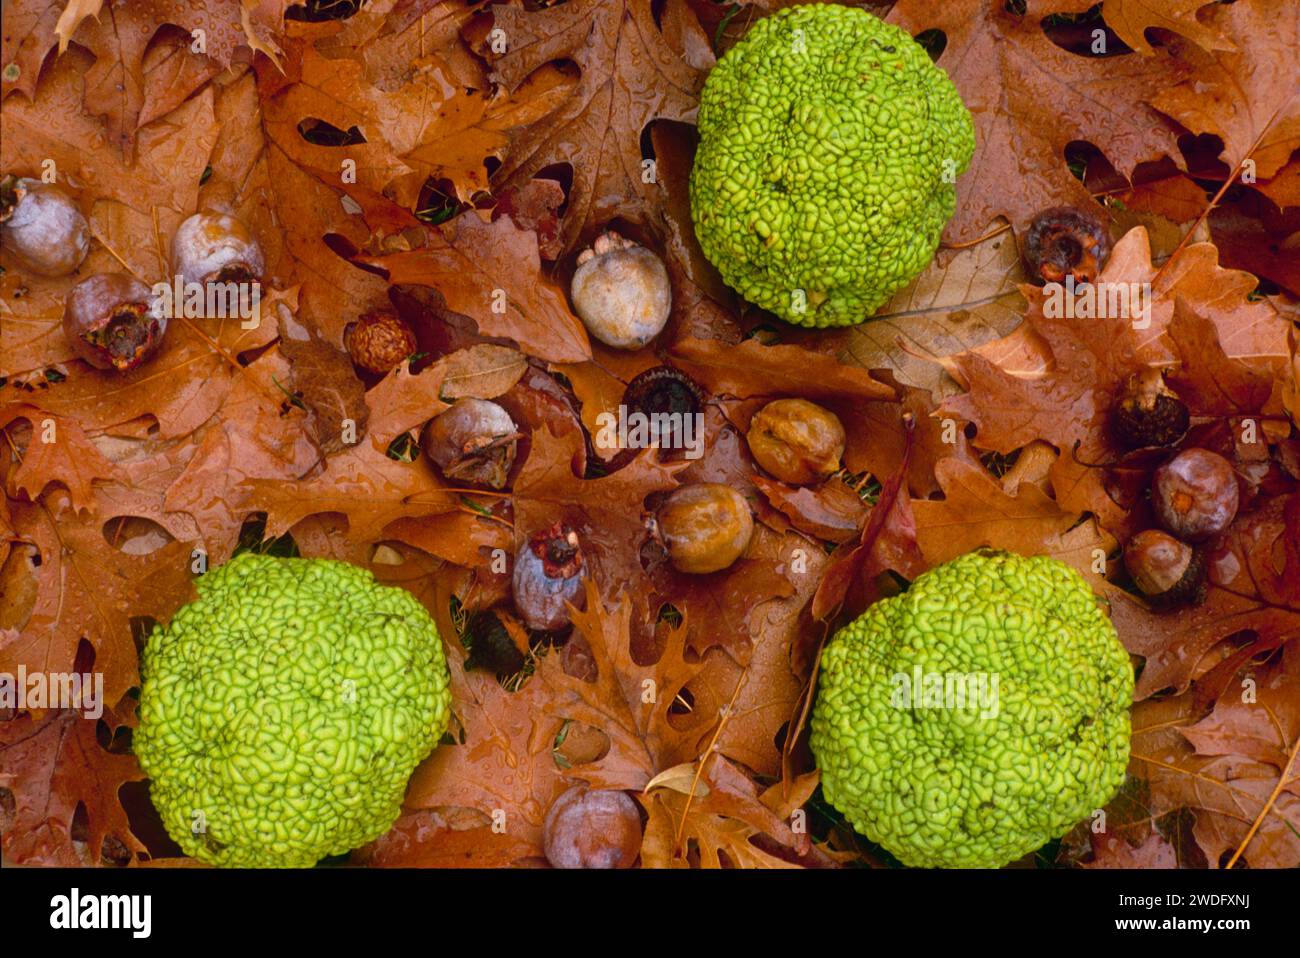 Hedge apples from the Osage orange tree (Maclura pomifera) persimmons and acorns on wet leaves, western USA Stock Photo